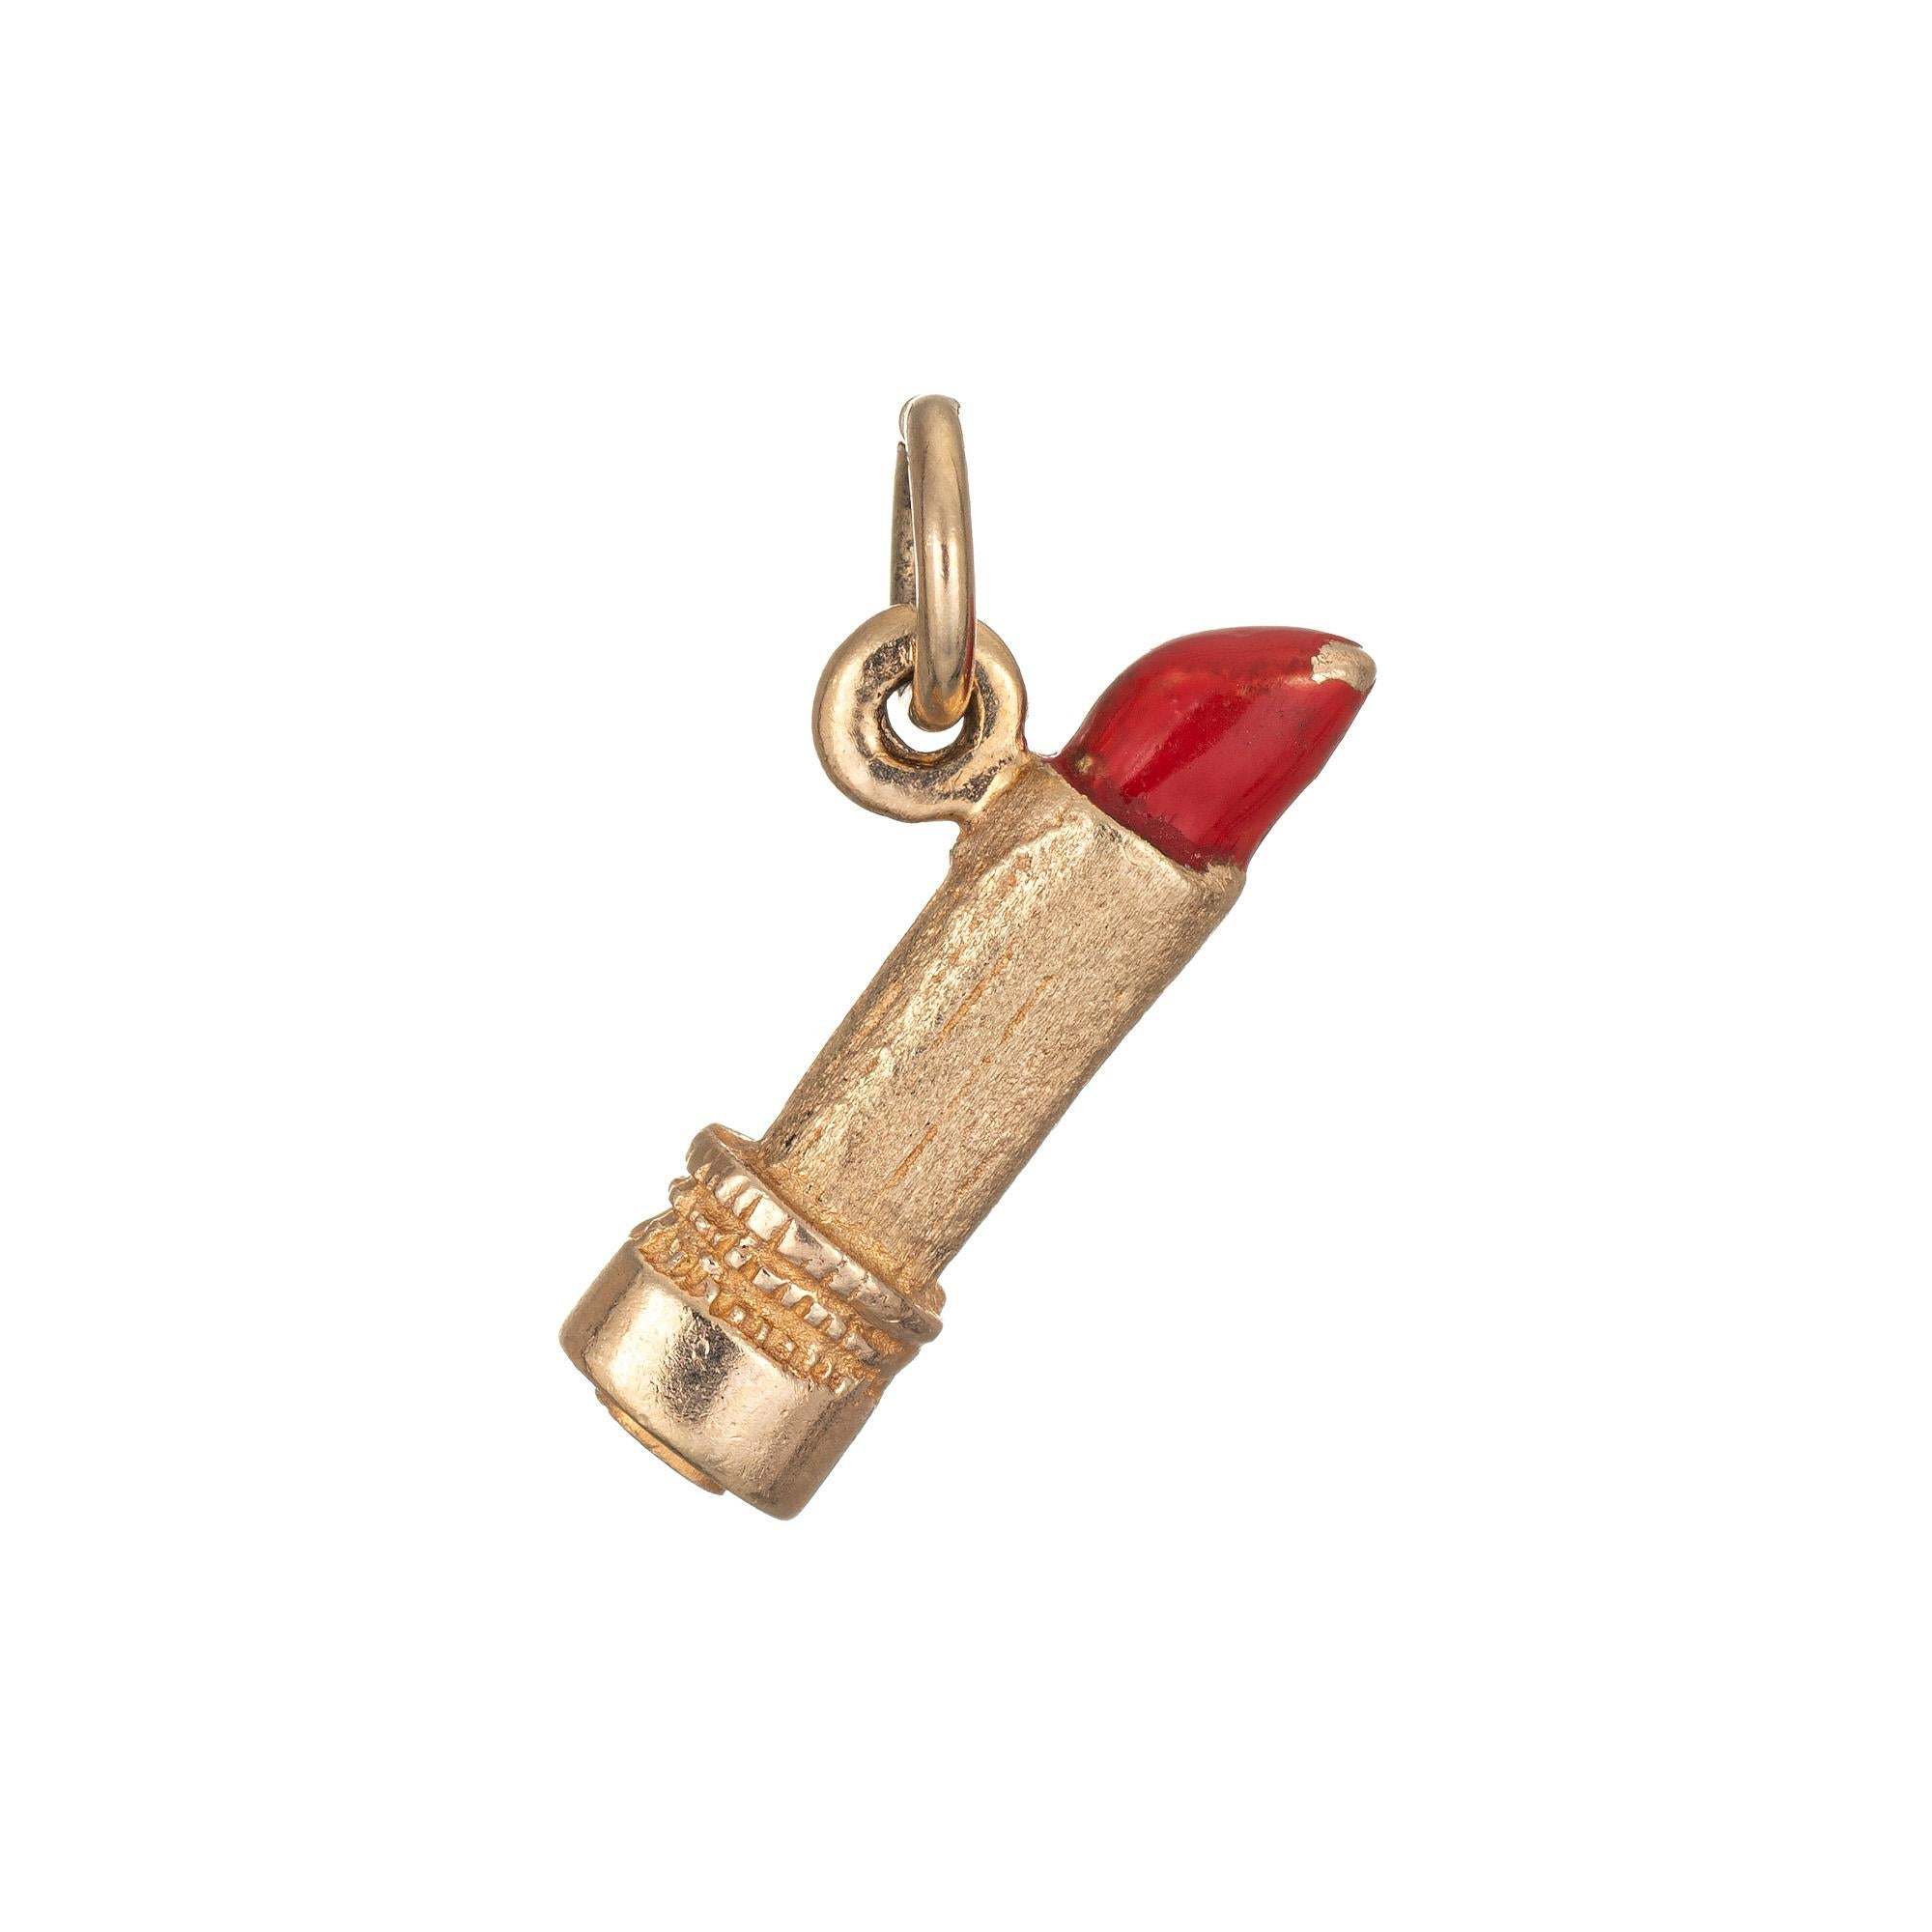 Finely detailed vintage red lipstick charm crafted in 14k yellow gold.  

The unique charm features lifelike detail of a tube of red lipstick rendered in enamel. The bale measures 3mm and can accommodate a thin to medium thickness chain if desired.